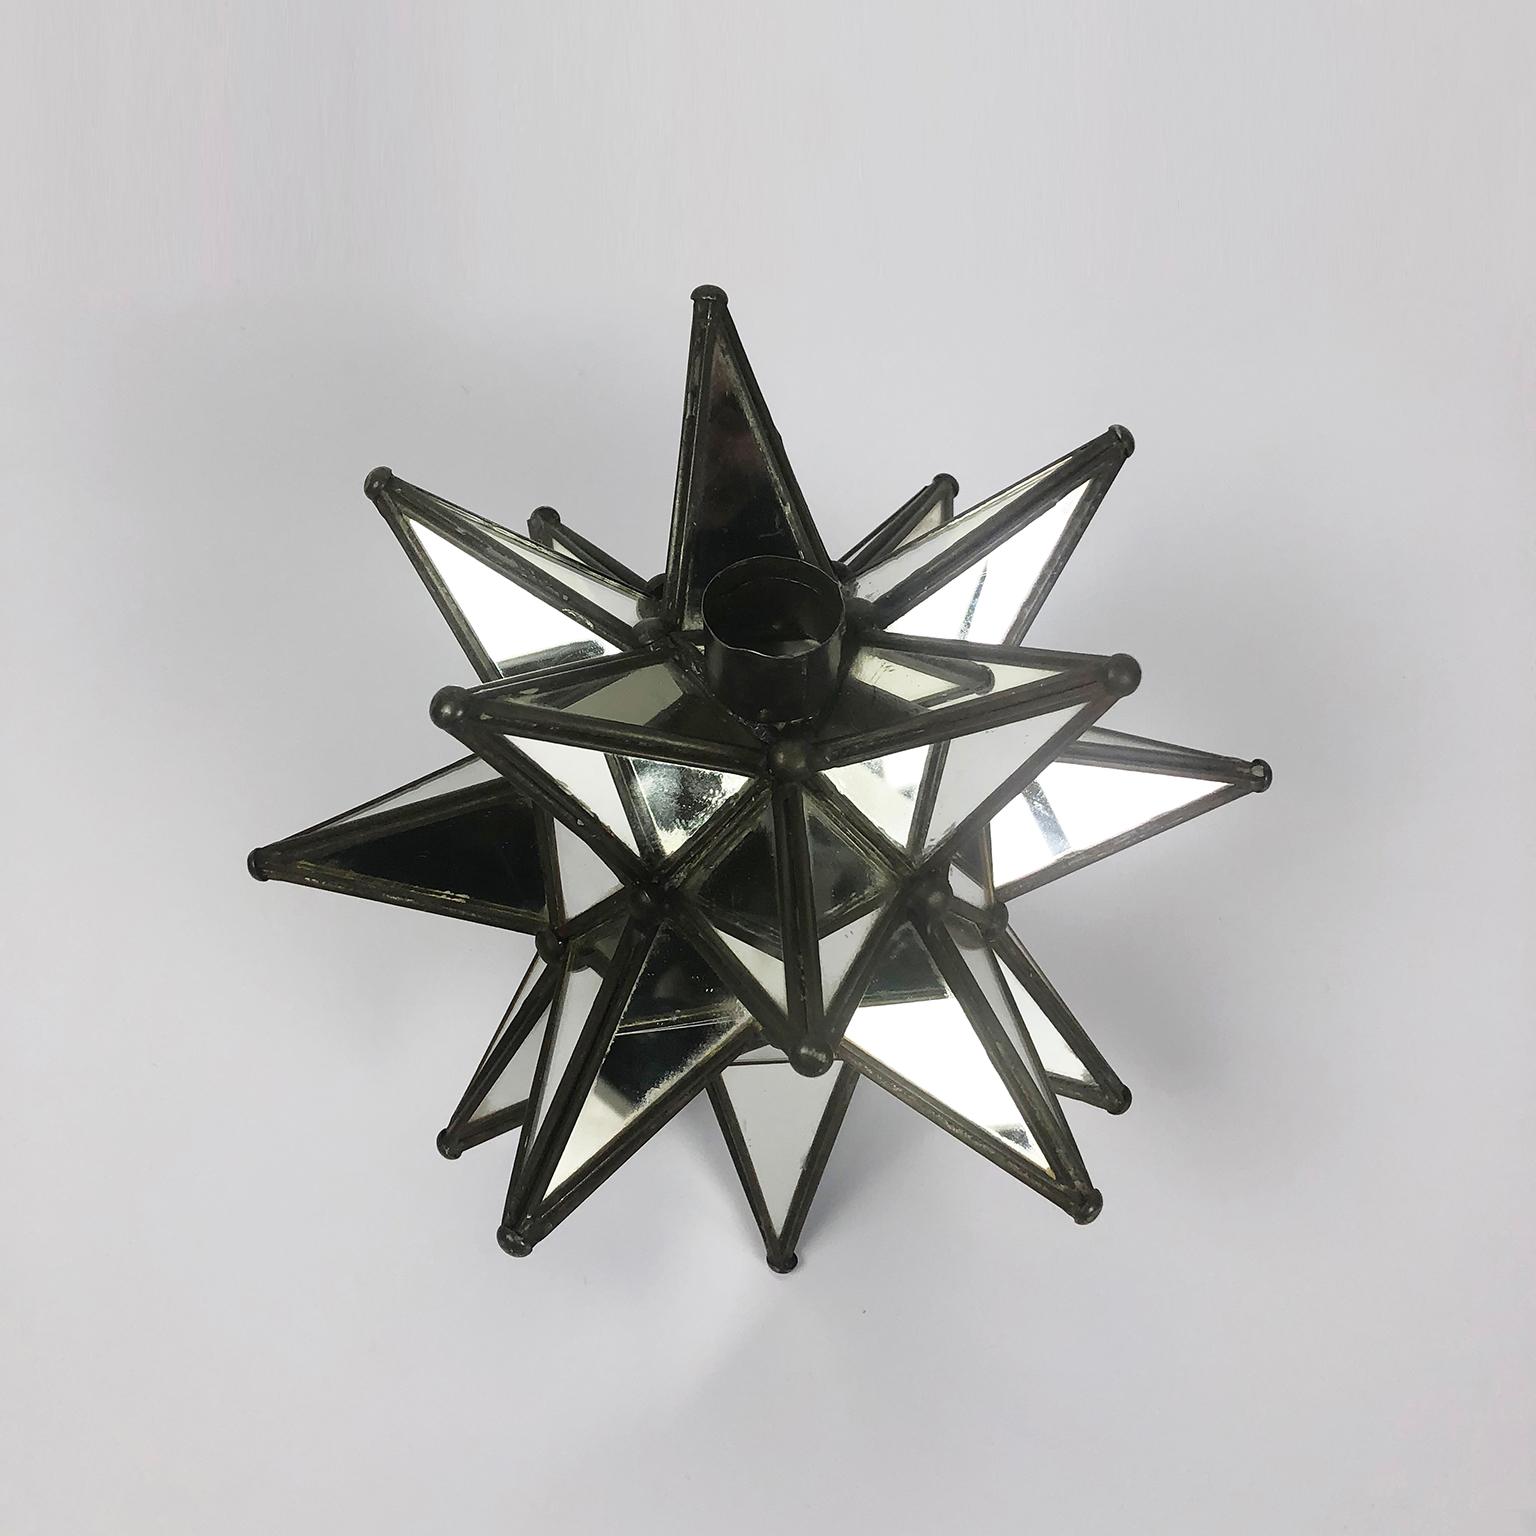 We offer this fantastic 100% handmade Mid-Century Modern pair of star-shaped candleholders with embedded mirrors, circa 1960.